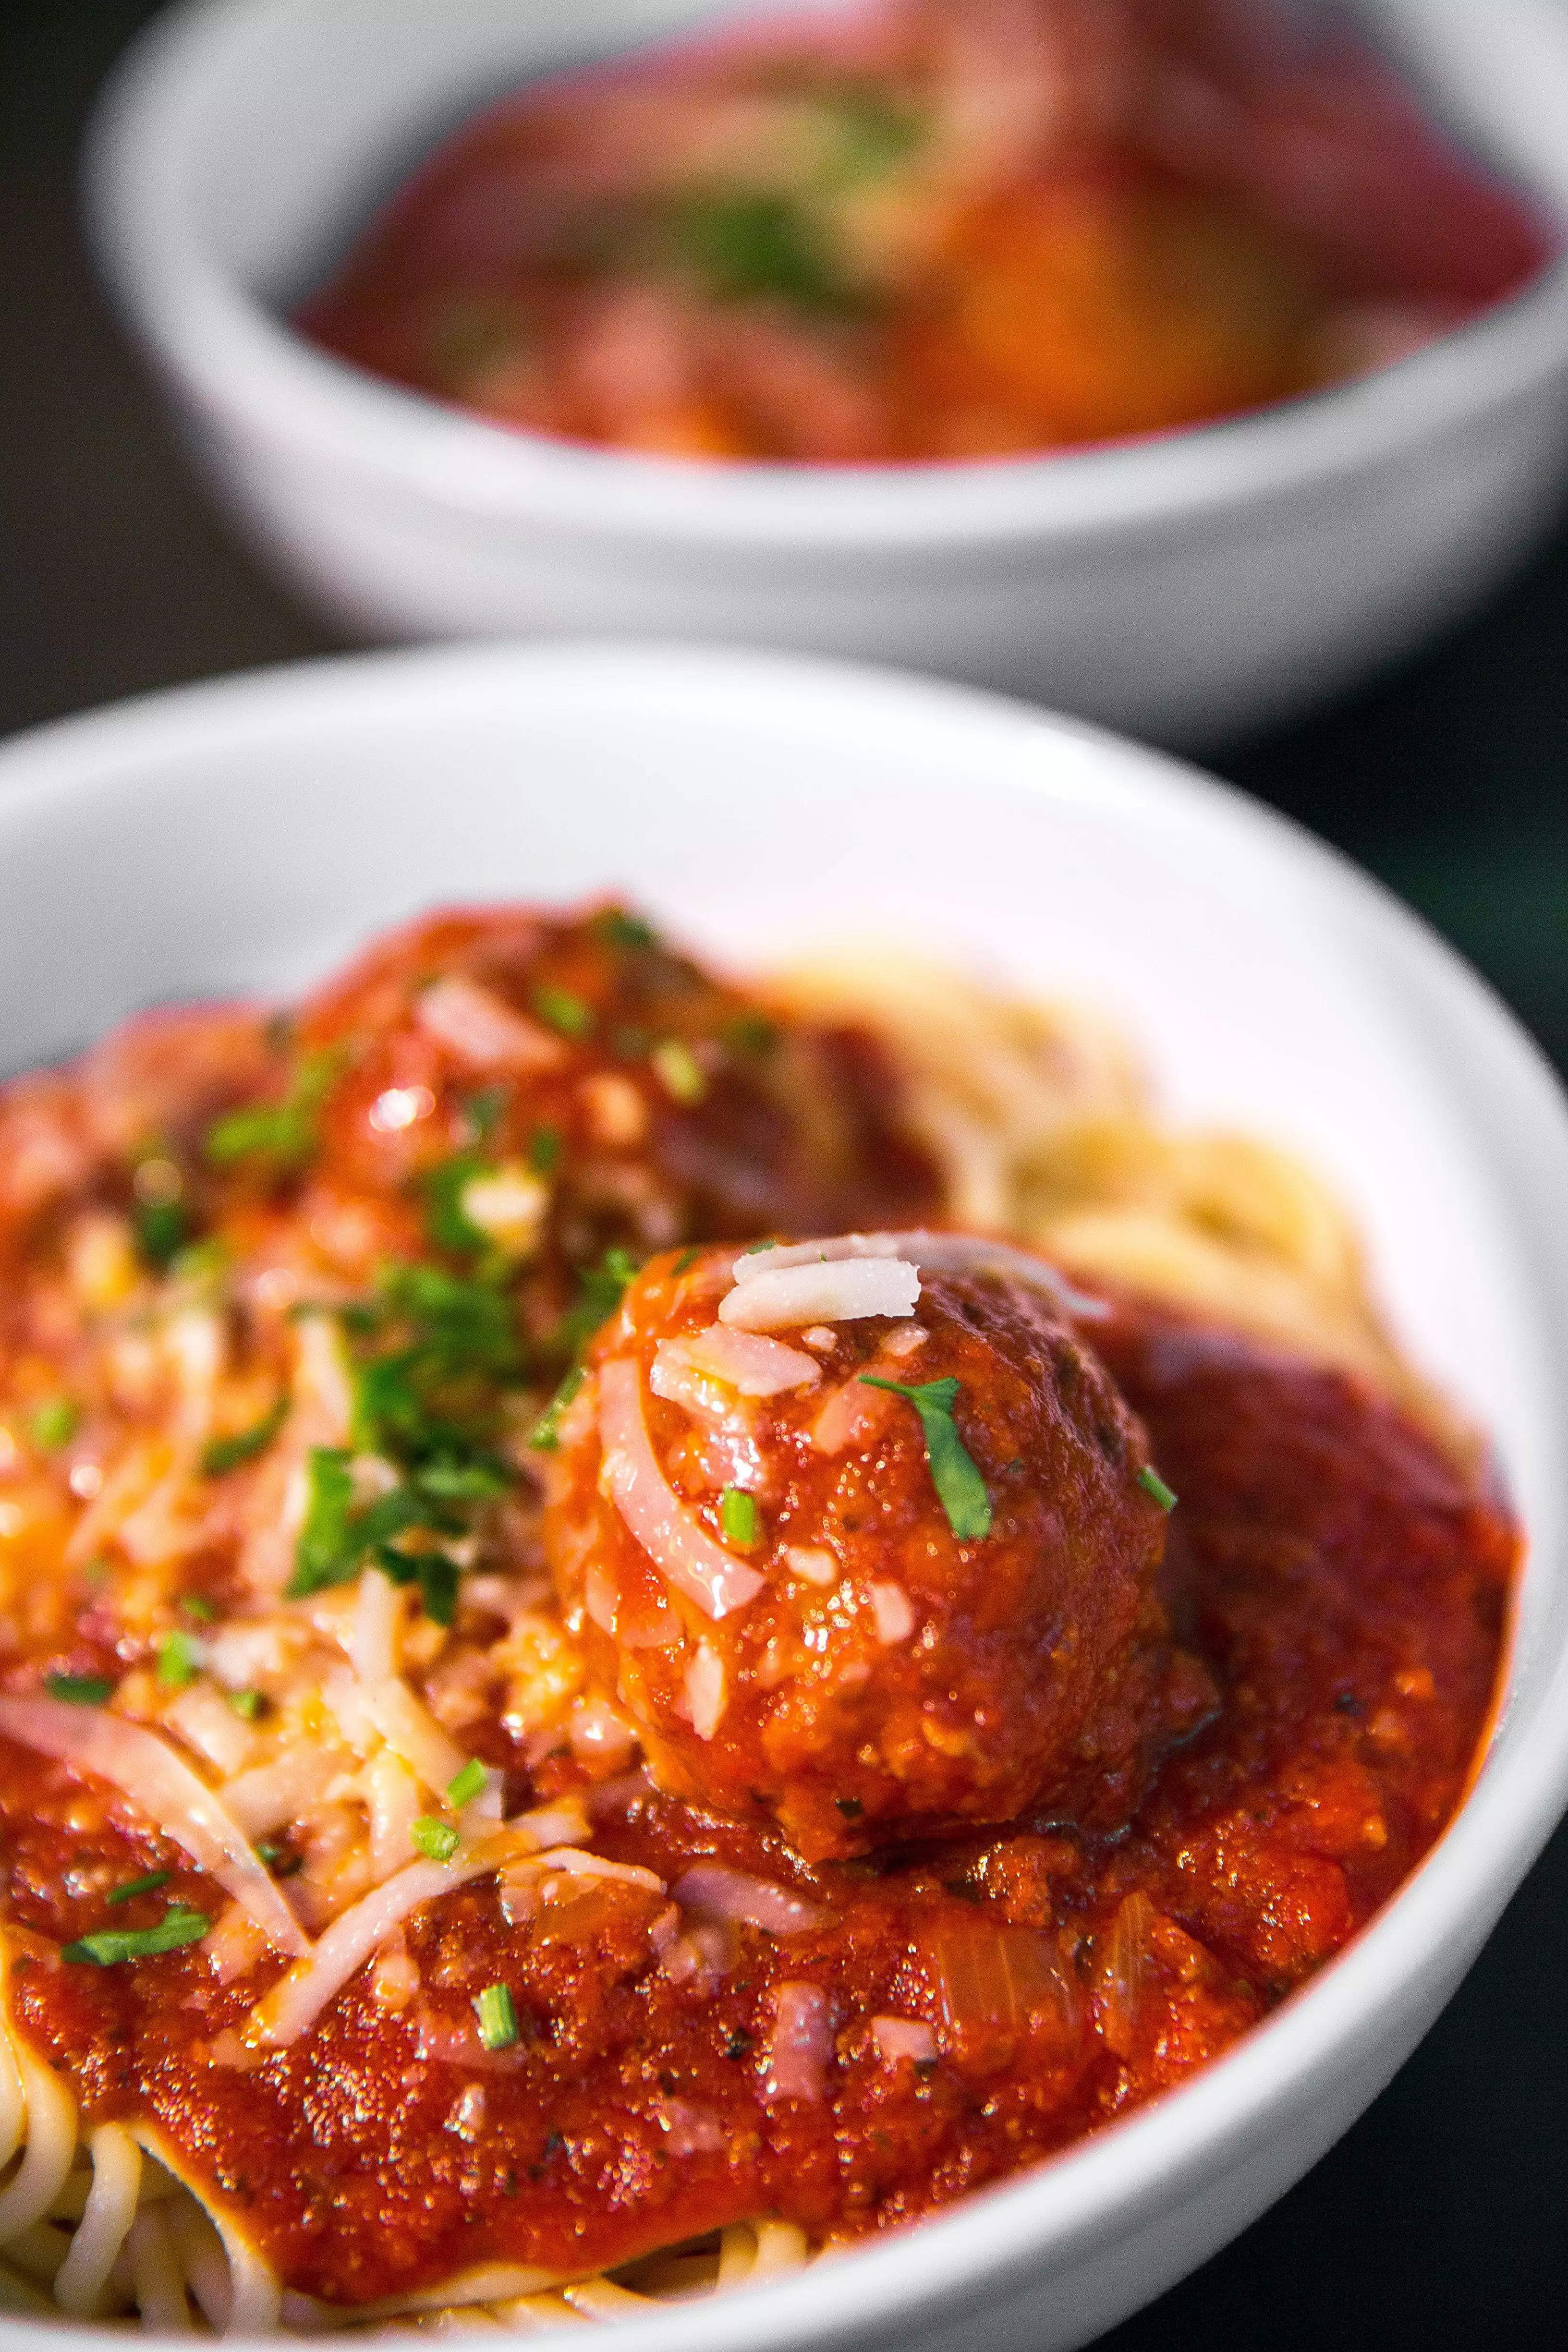 The recipe and ingredients for spaghetti and meatballs is included in the box (